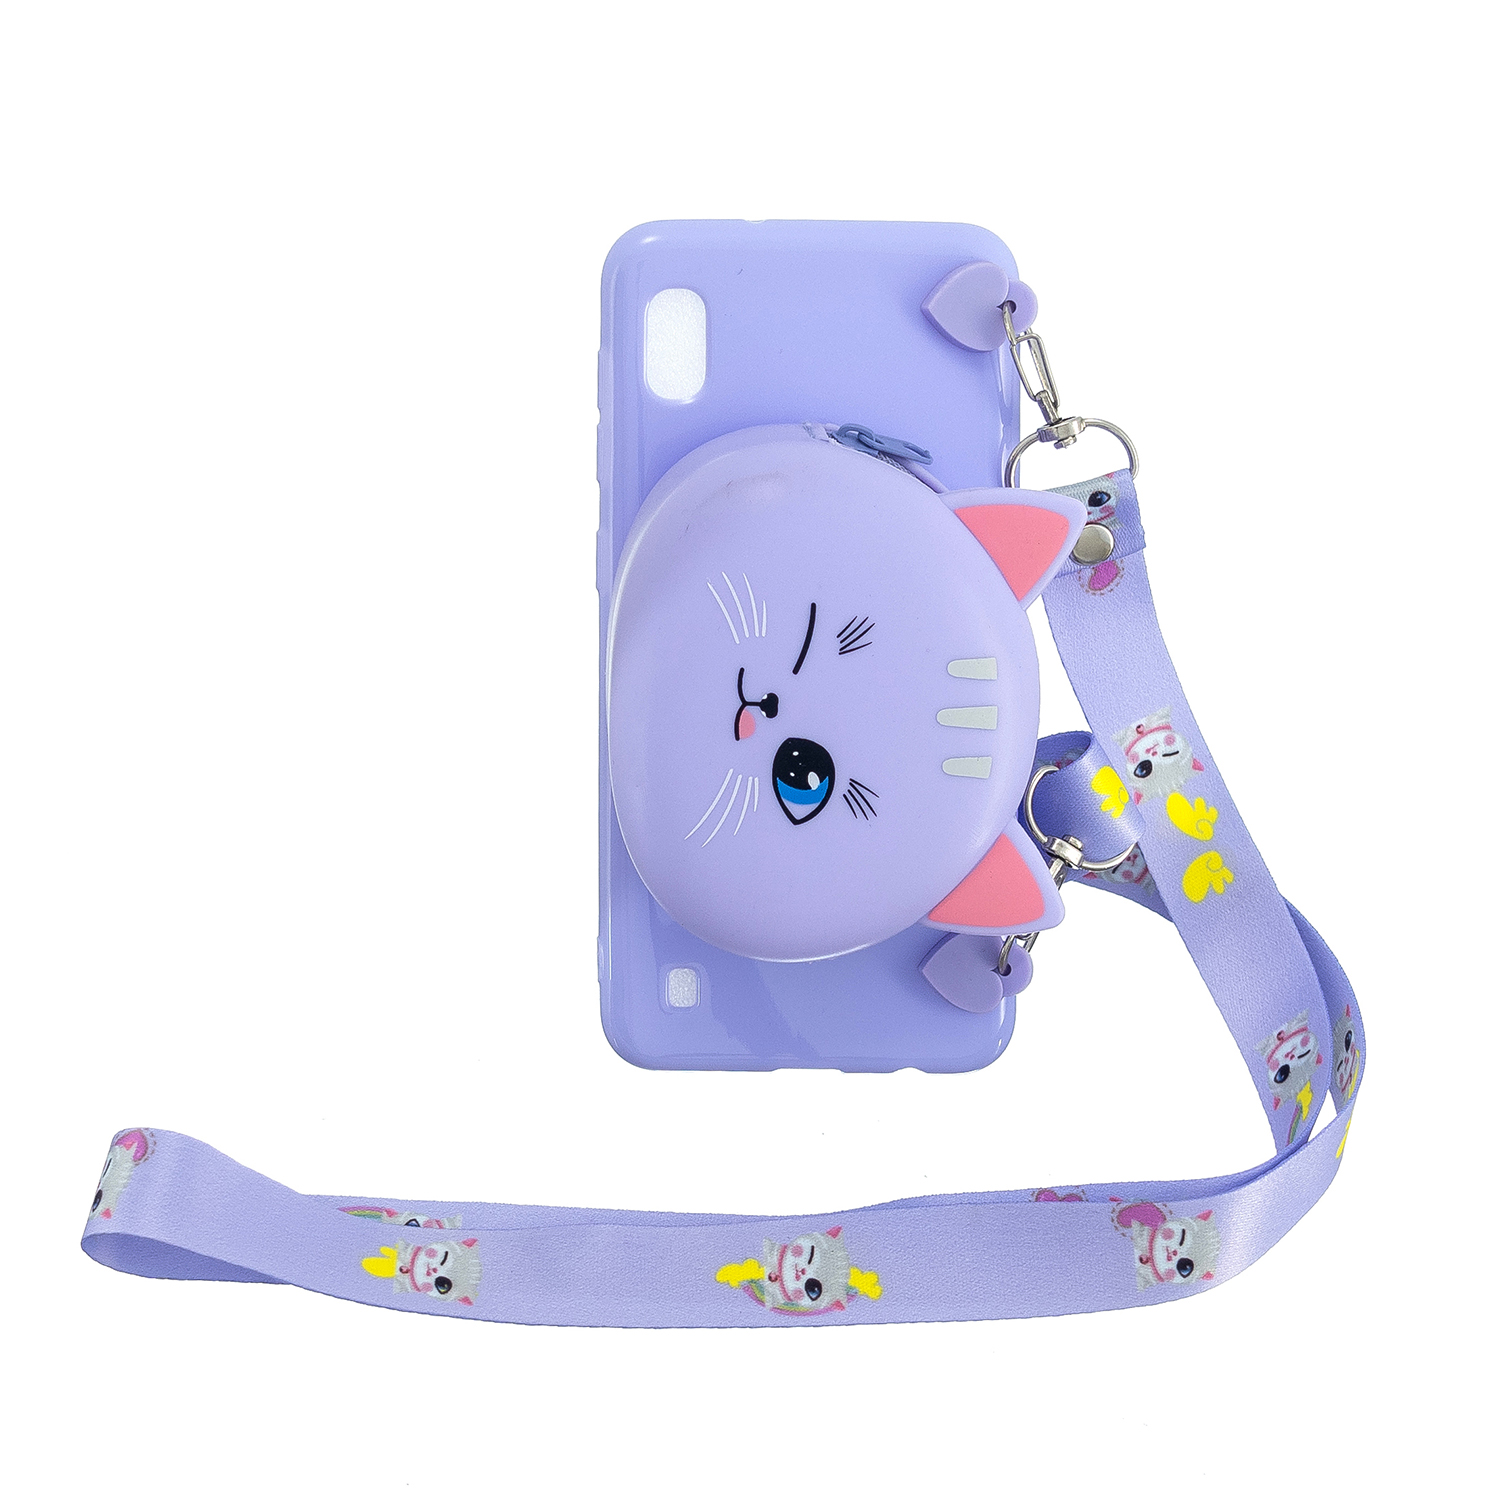 For Samsung A10/A20/A30 Case Mobile Phone Shell Shockproof TPU Cellphone Cover with Cartoon Cat Pig Panda Coin Purse Lovely Shoulder Starp  Purple